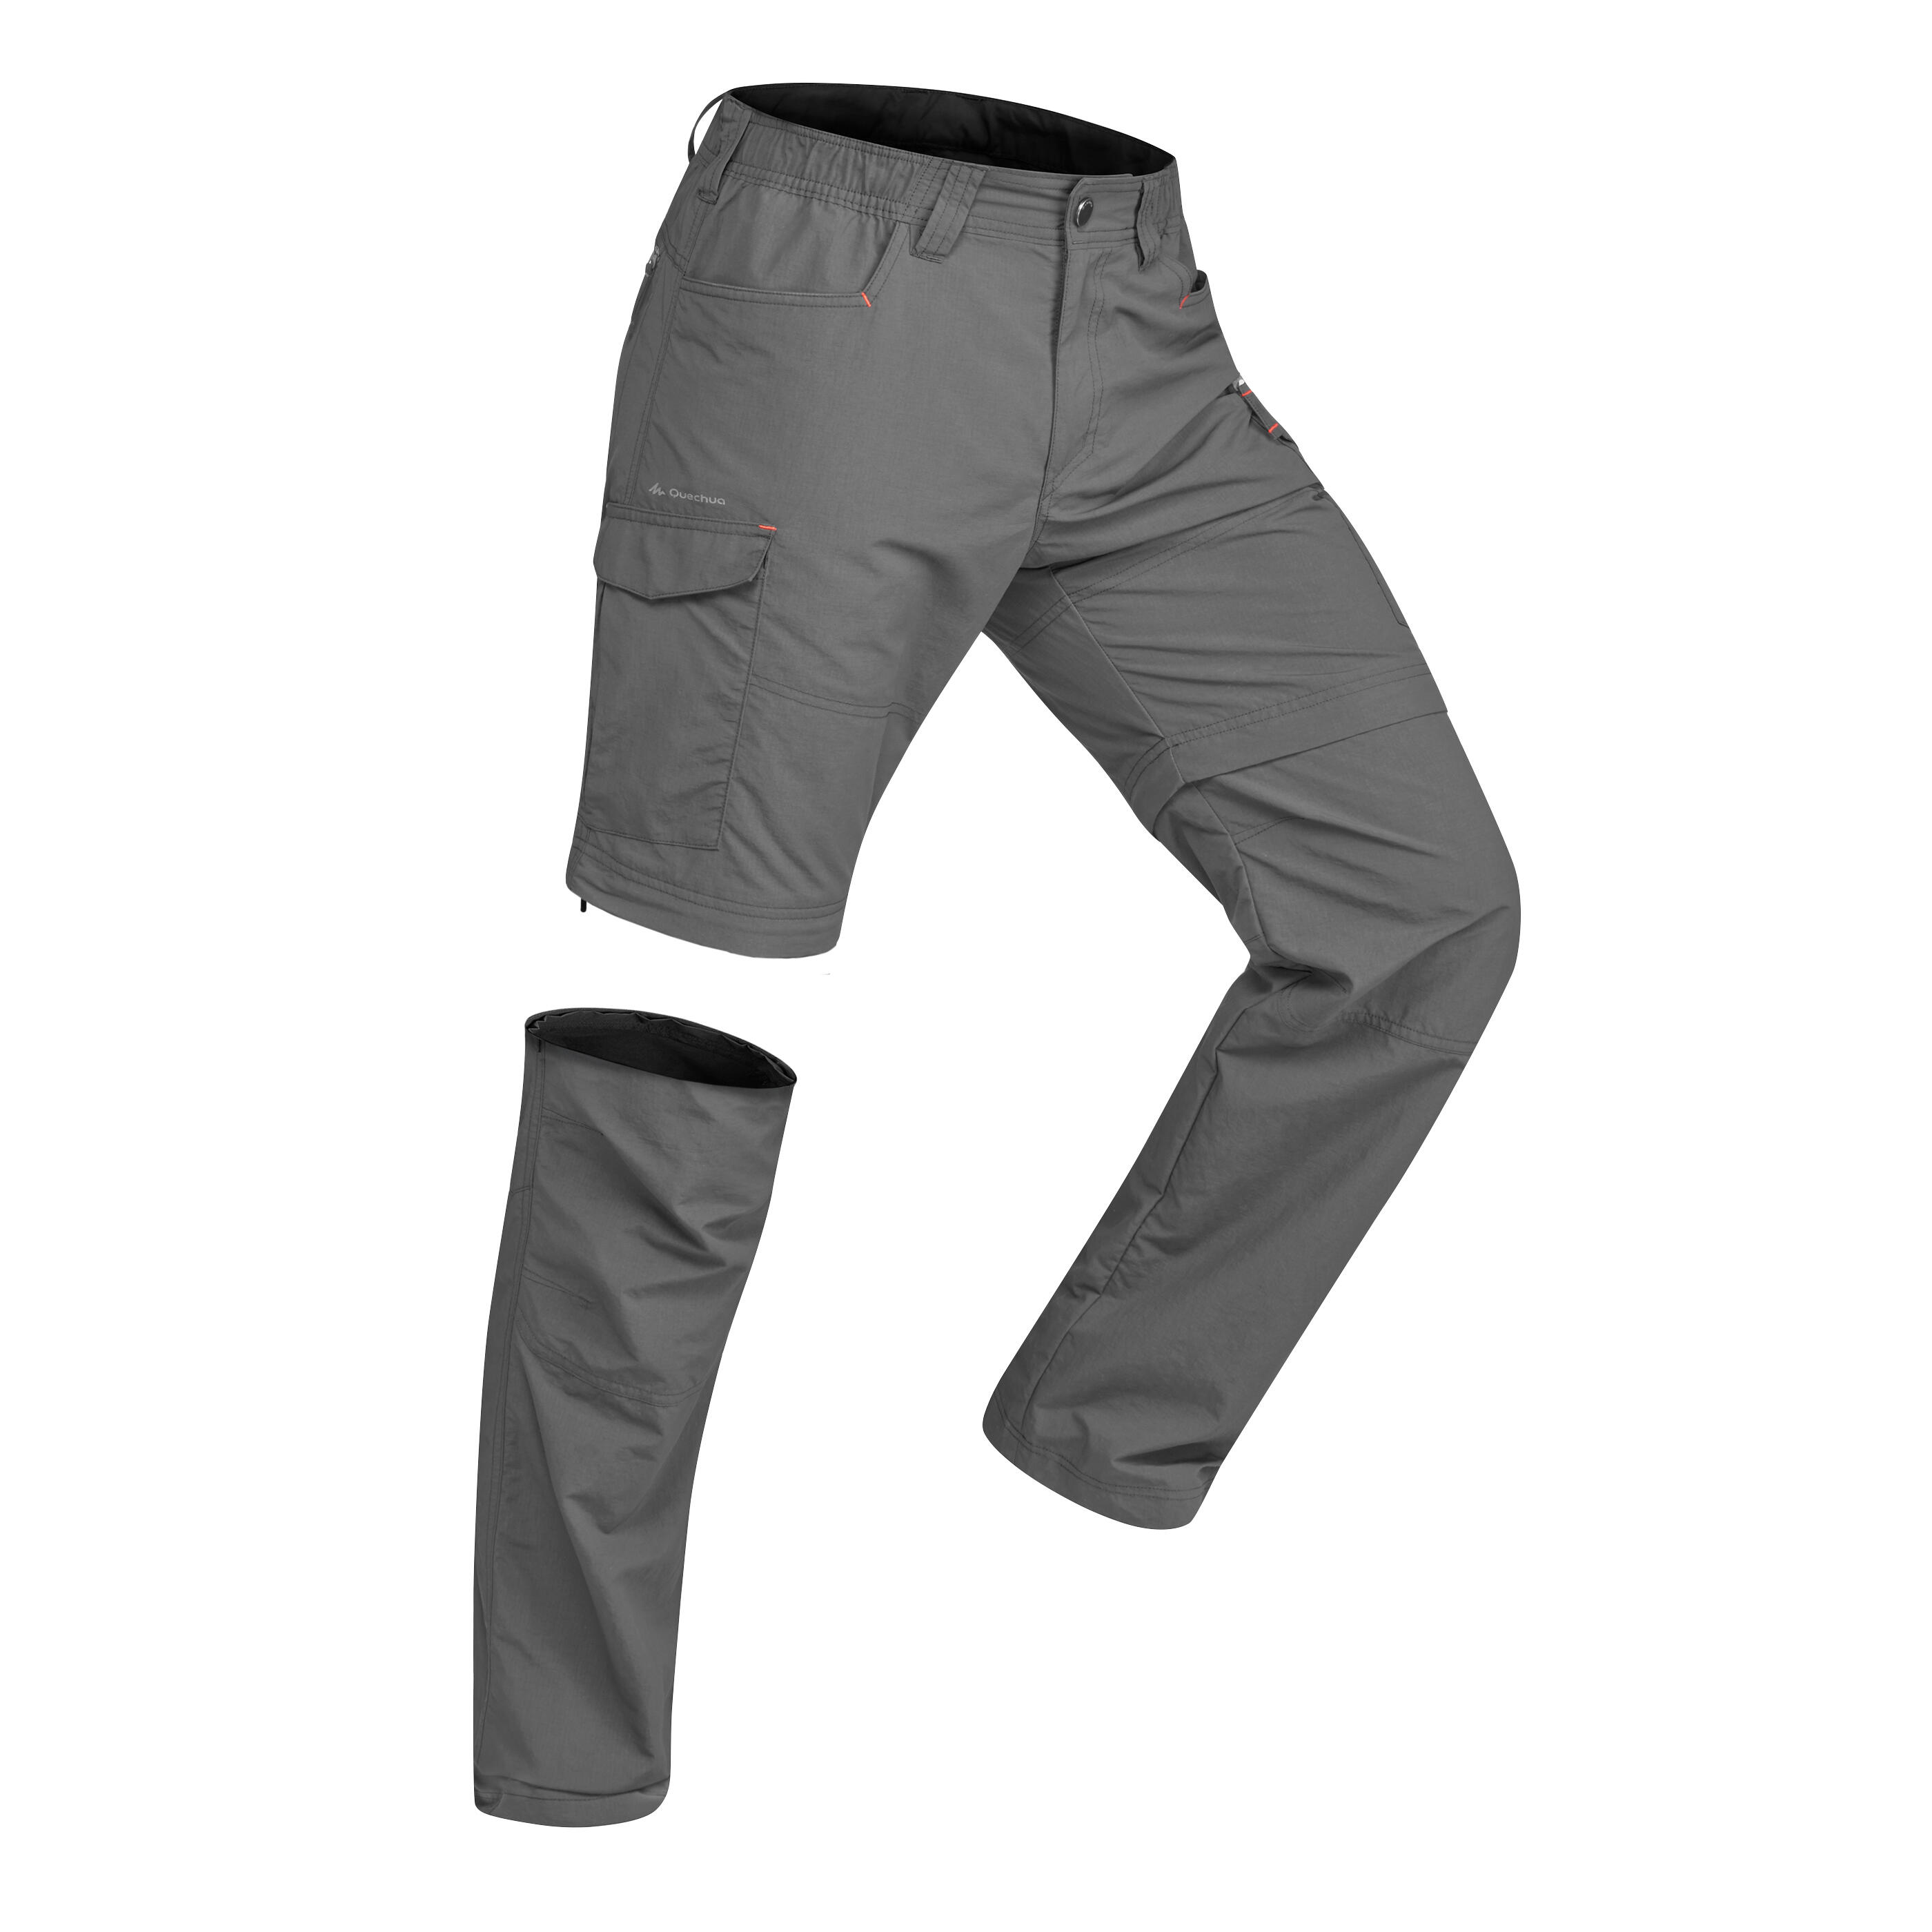 Forclaz 100 convertible hiking trousers 